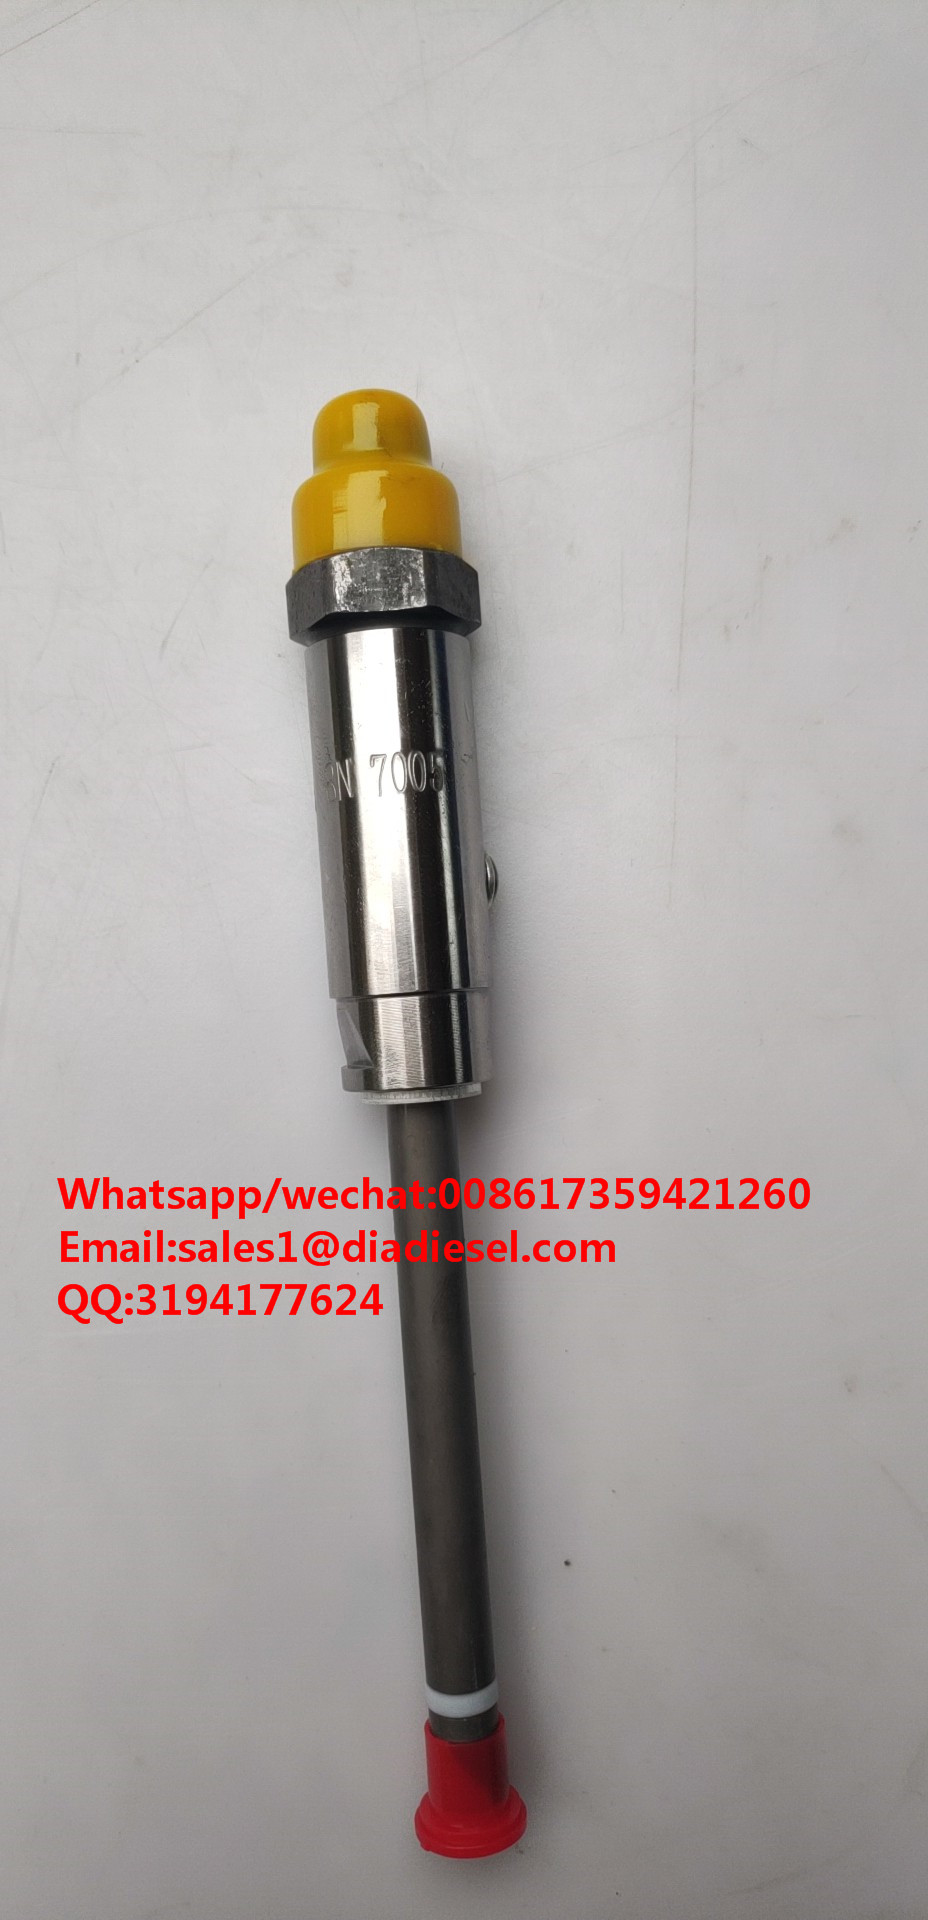 High Quality Fuel Injector Pencil Nozzle Assembly CAT 8N7005 for Caterpillar Cat 3304 3306 for sale